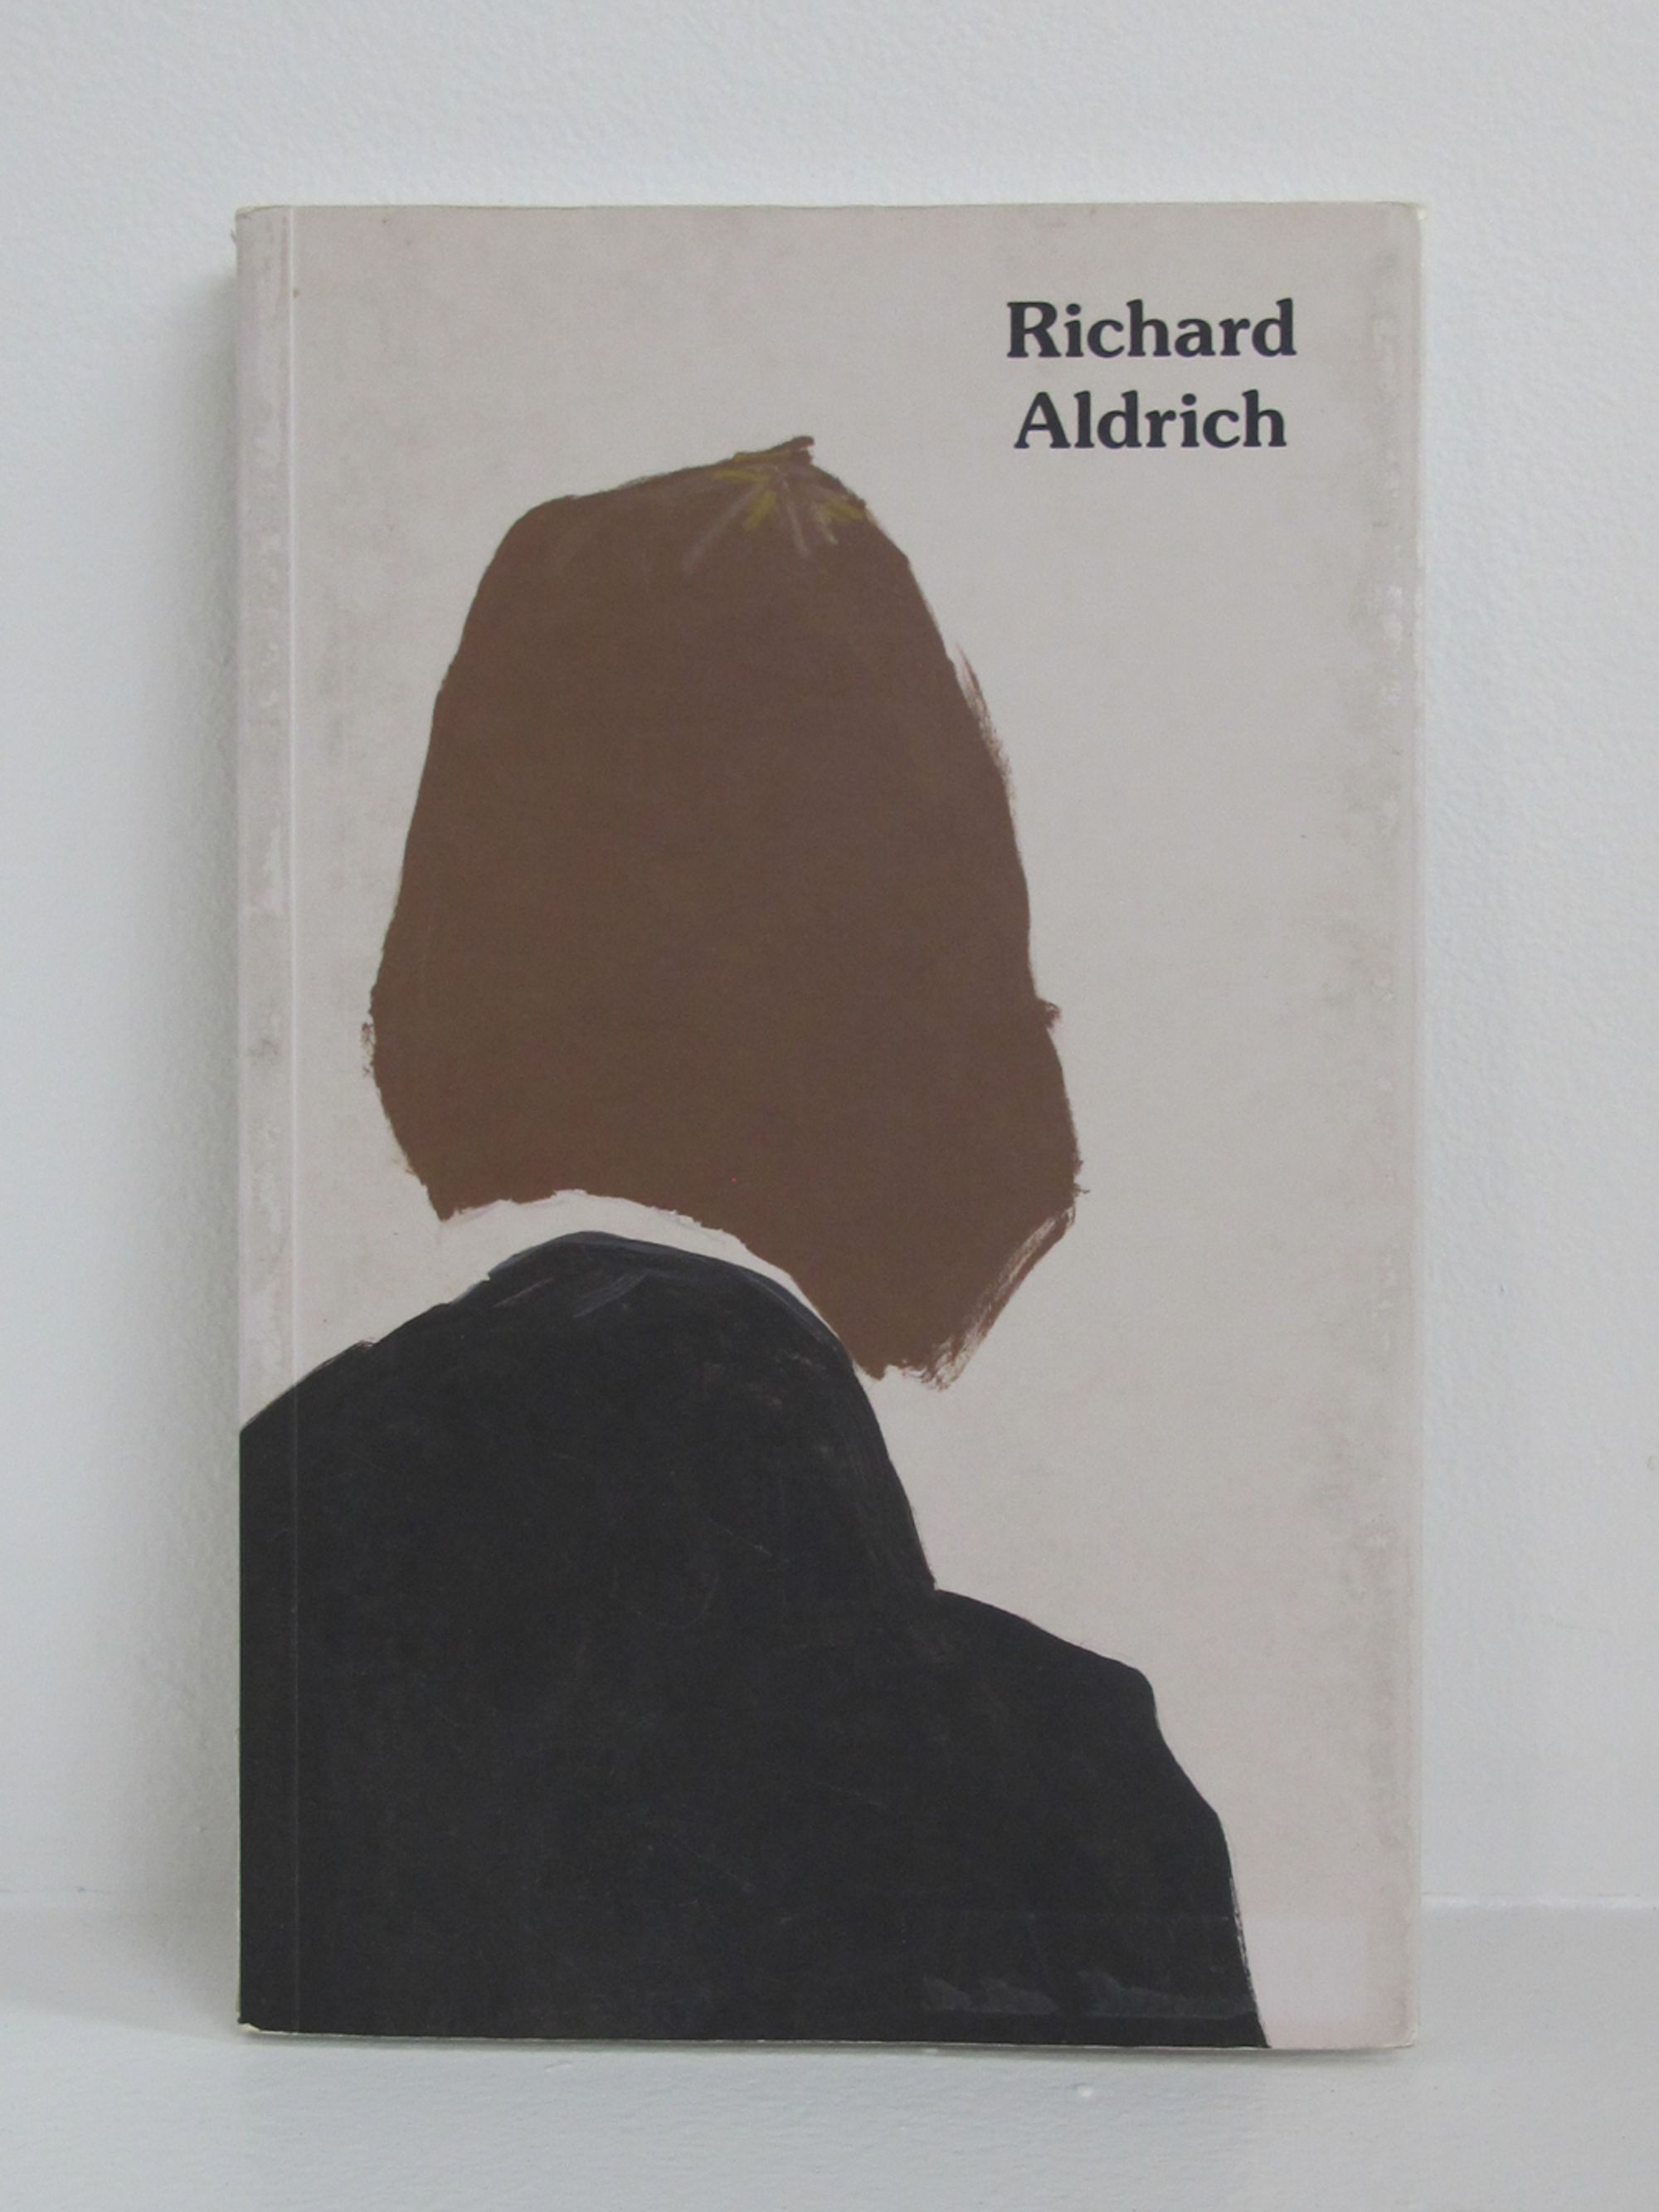 Book cover on plain background with title of Richard Aldrich